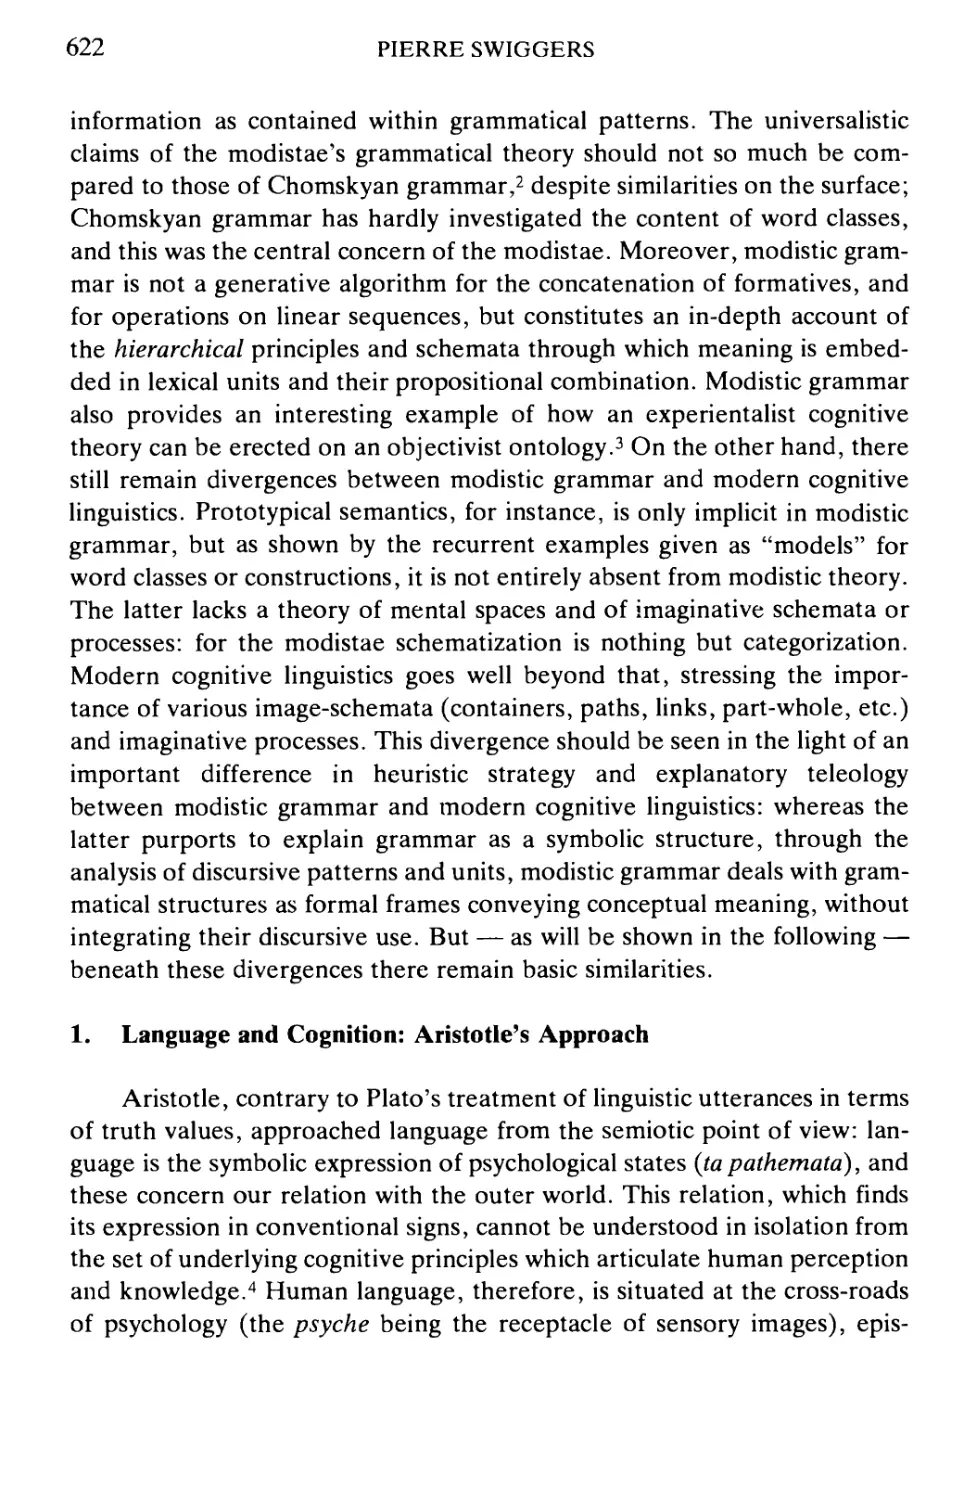 1. Language and Cognition: Aristotle's Approach